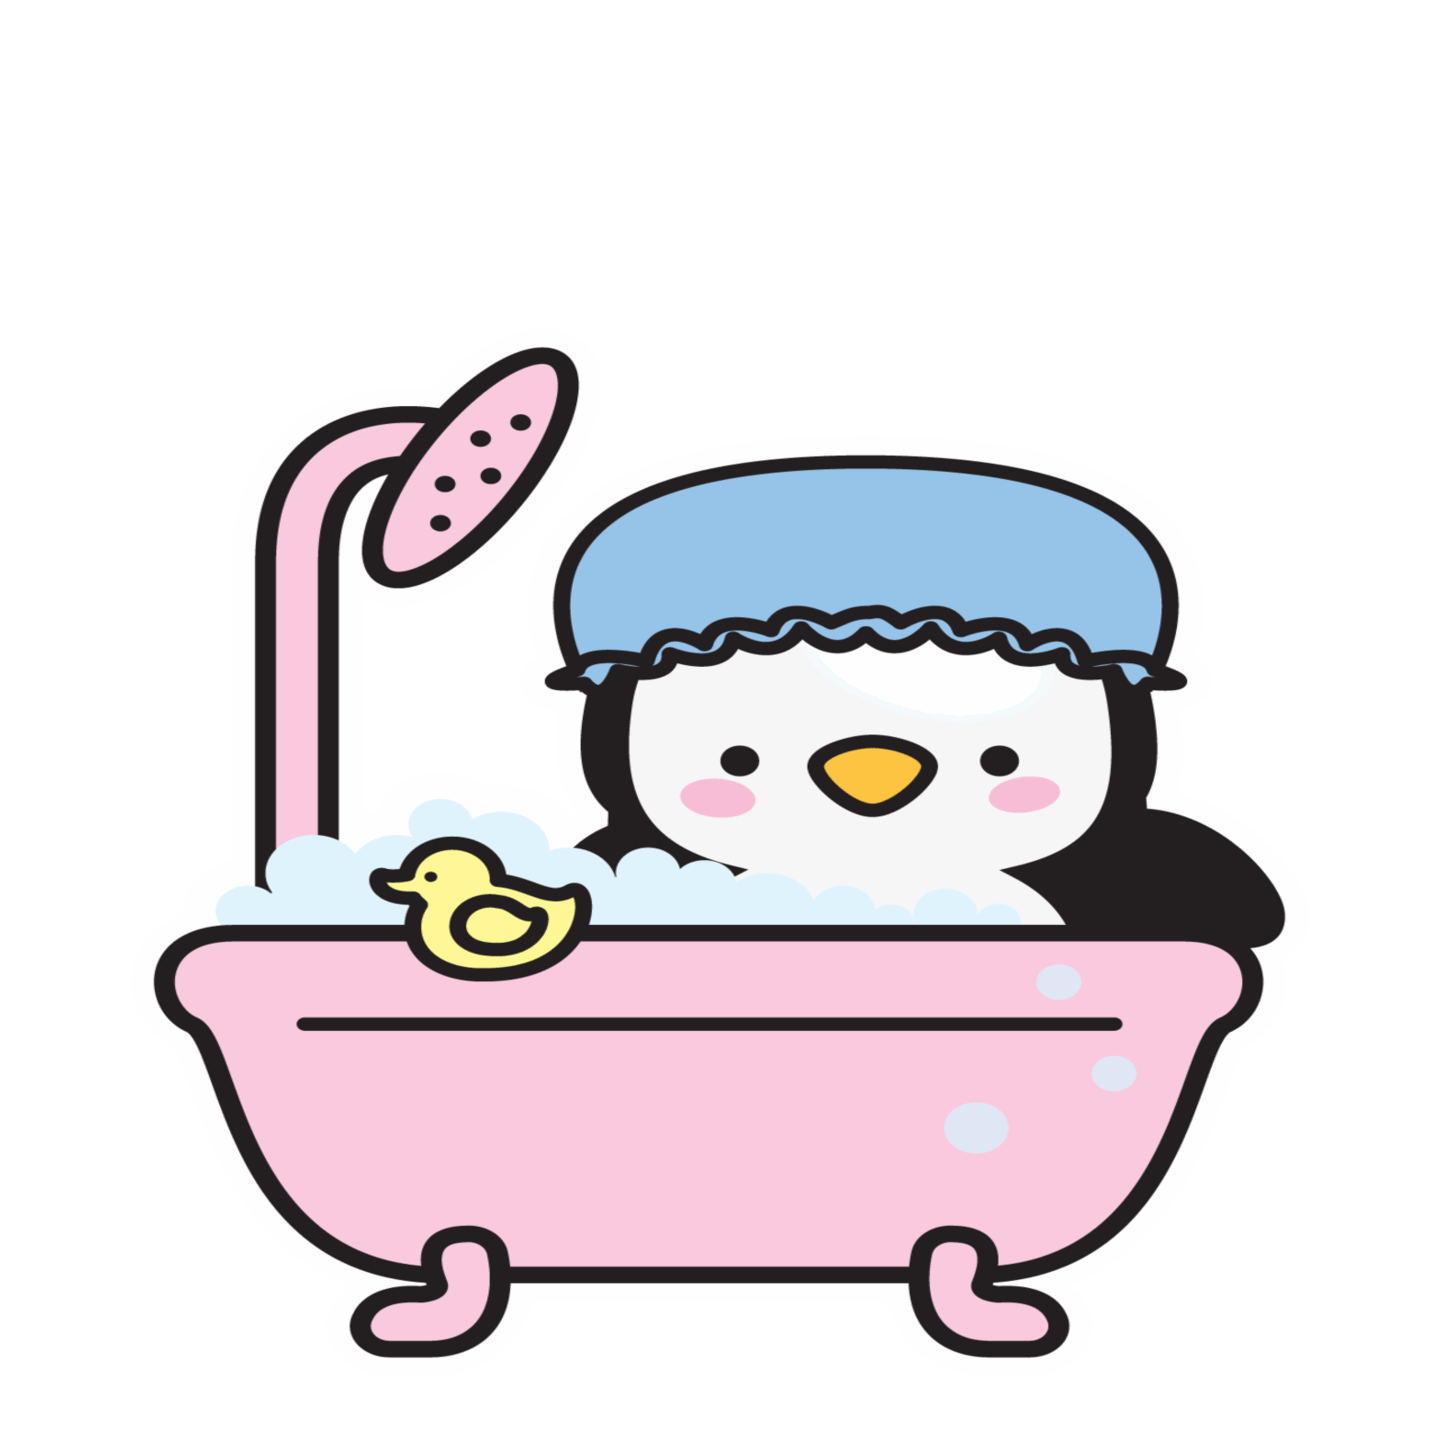 showering clipart animation